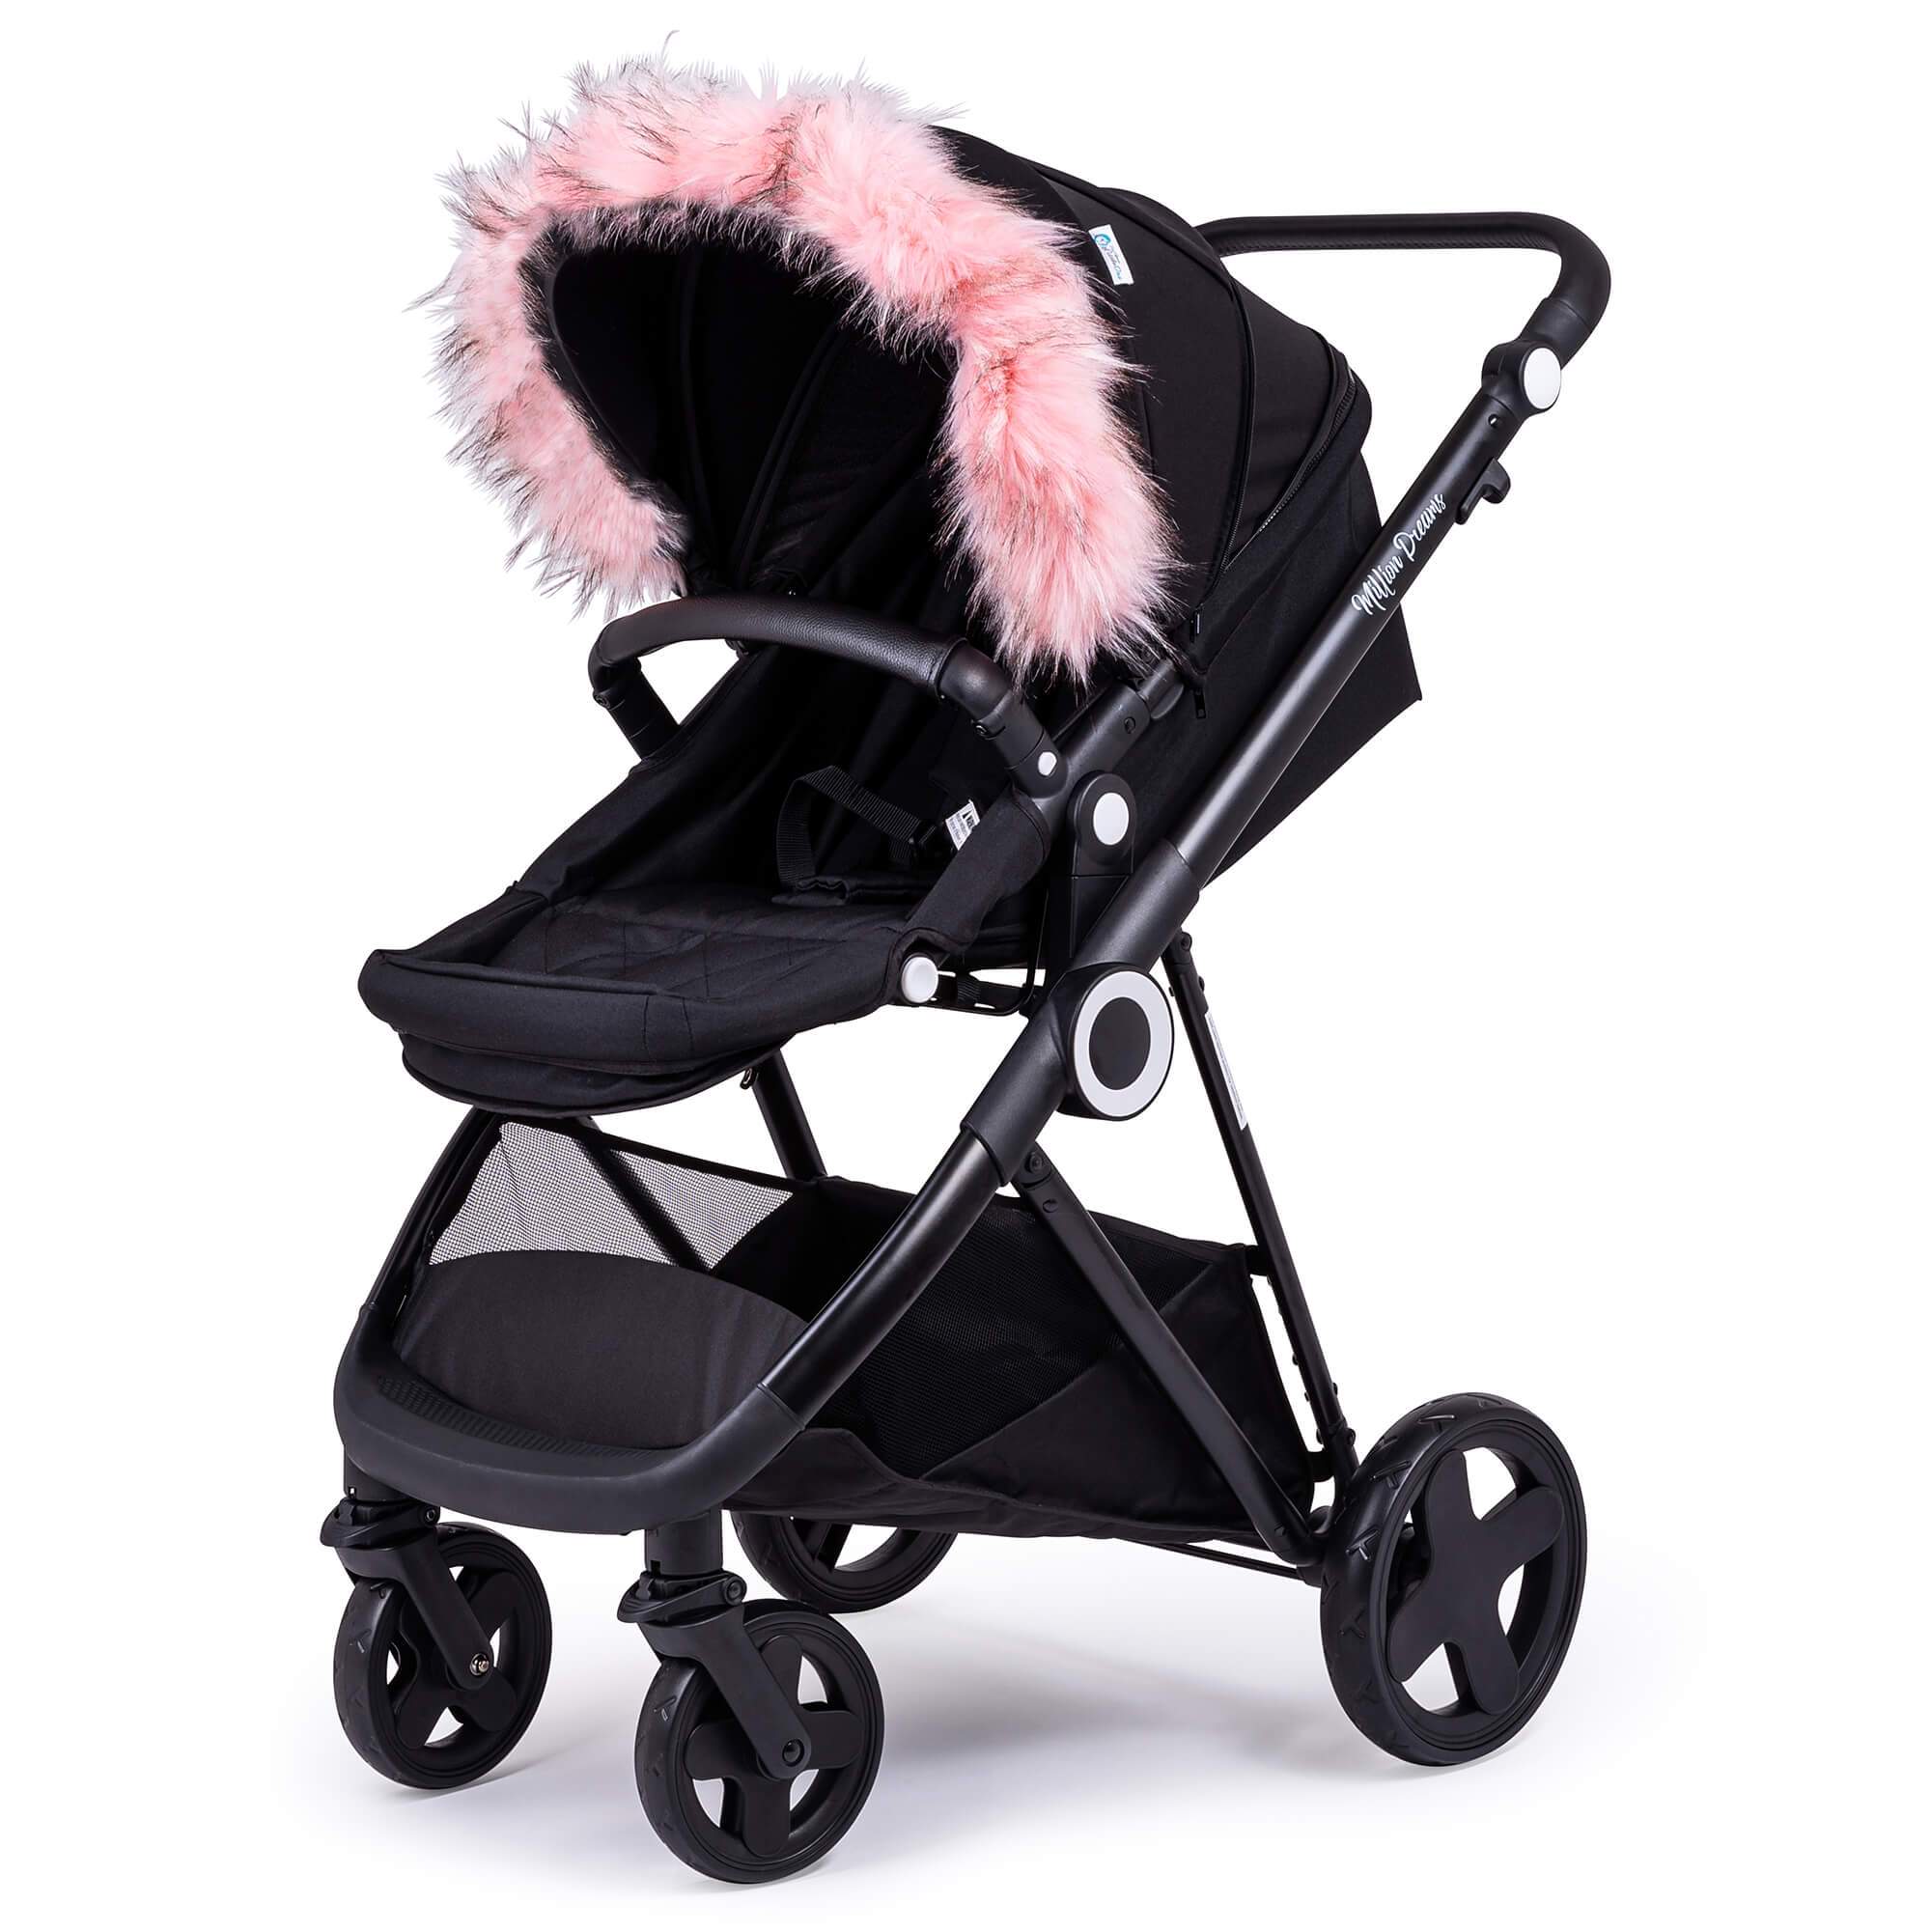 Pram Fur Hood Trim Attachment for Pushchair Compatible with Bugaboo - Light Pink / Fits All Models | For Your Little One